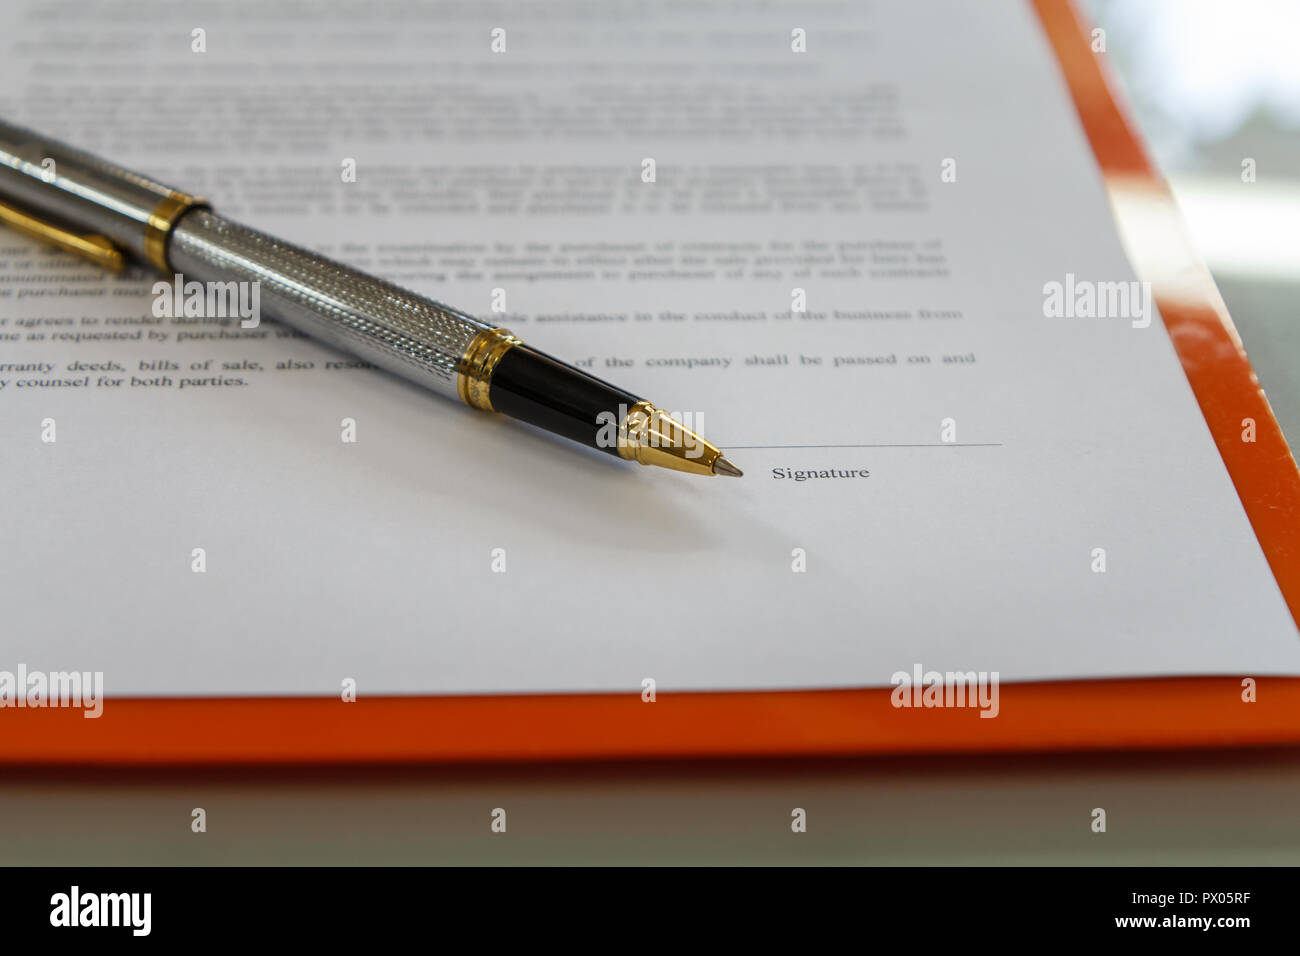 A pen on contract paper preparation for signing a contract. Stock Photo